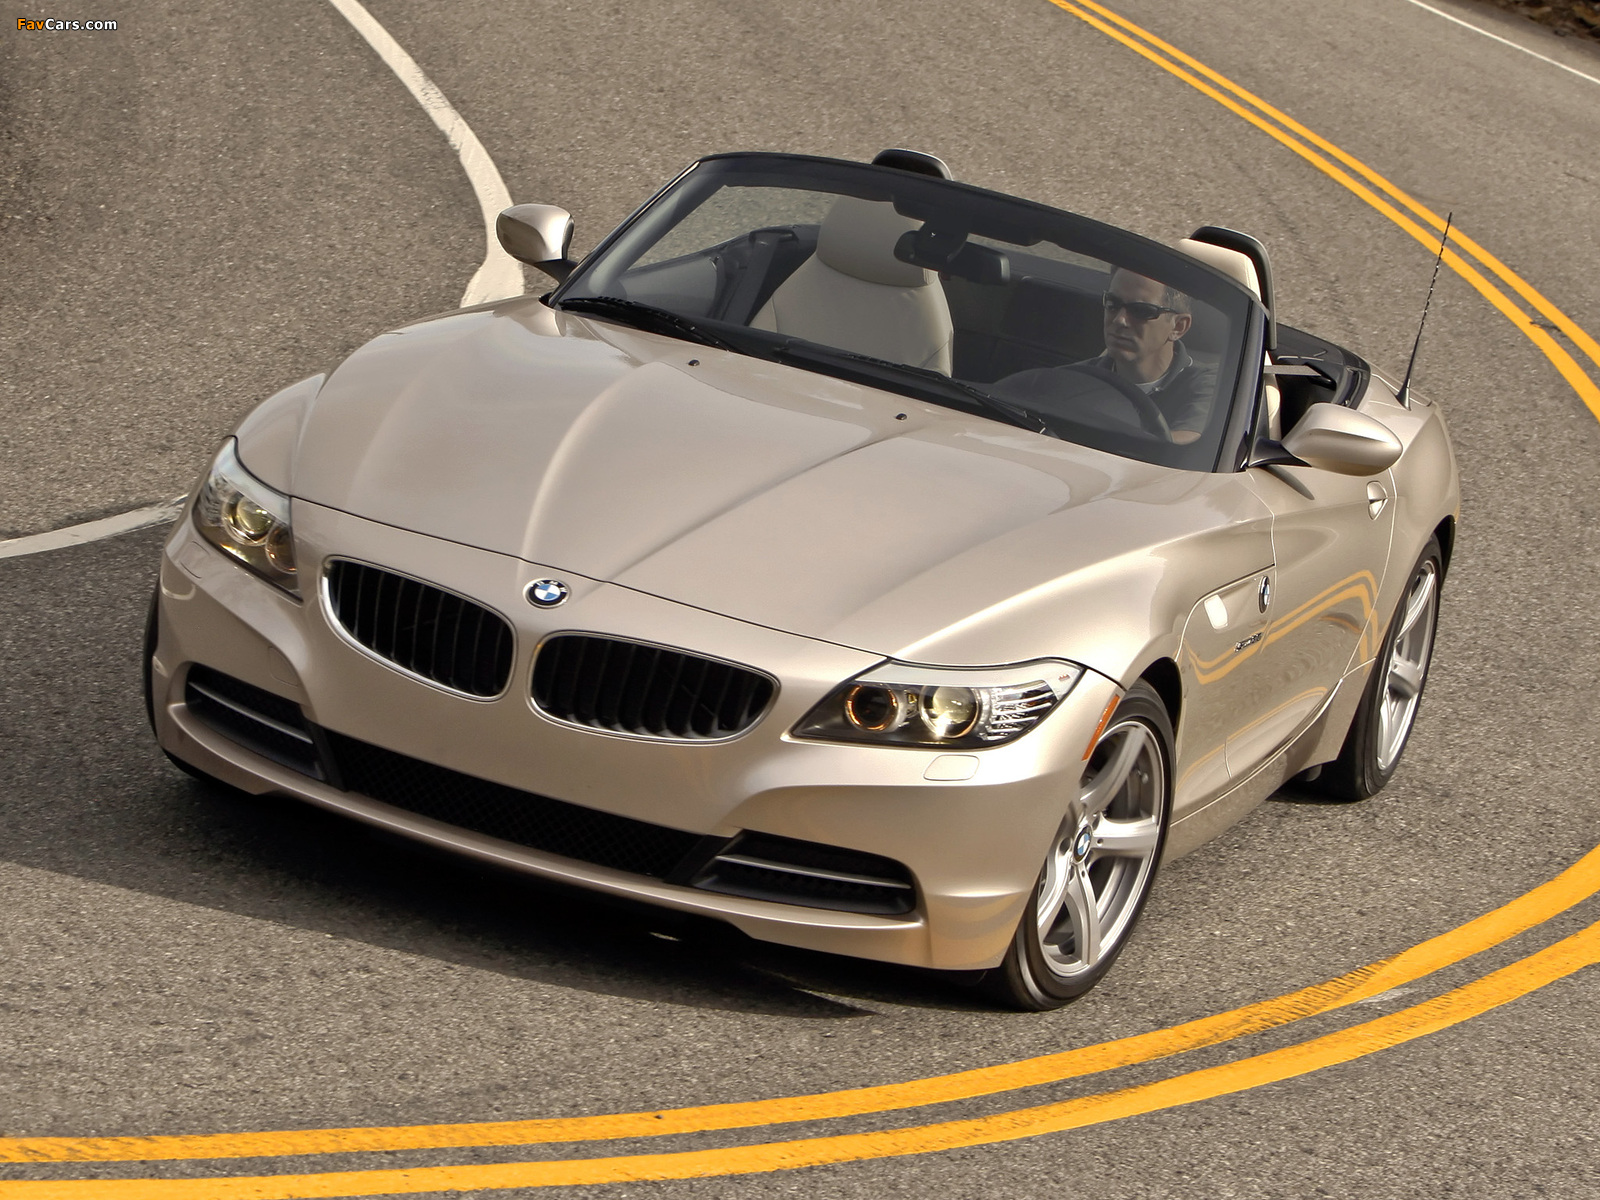 BMW Z4 sDrive30i Roadster US-spec (E89) 2009 pictures (1600 x 1200)